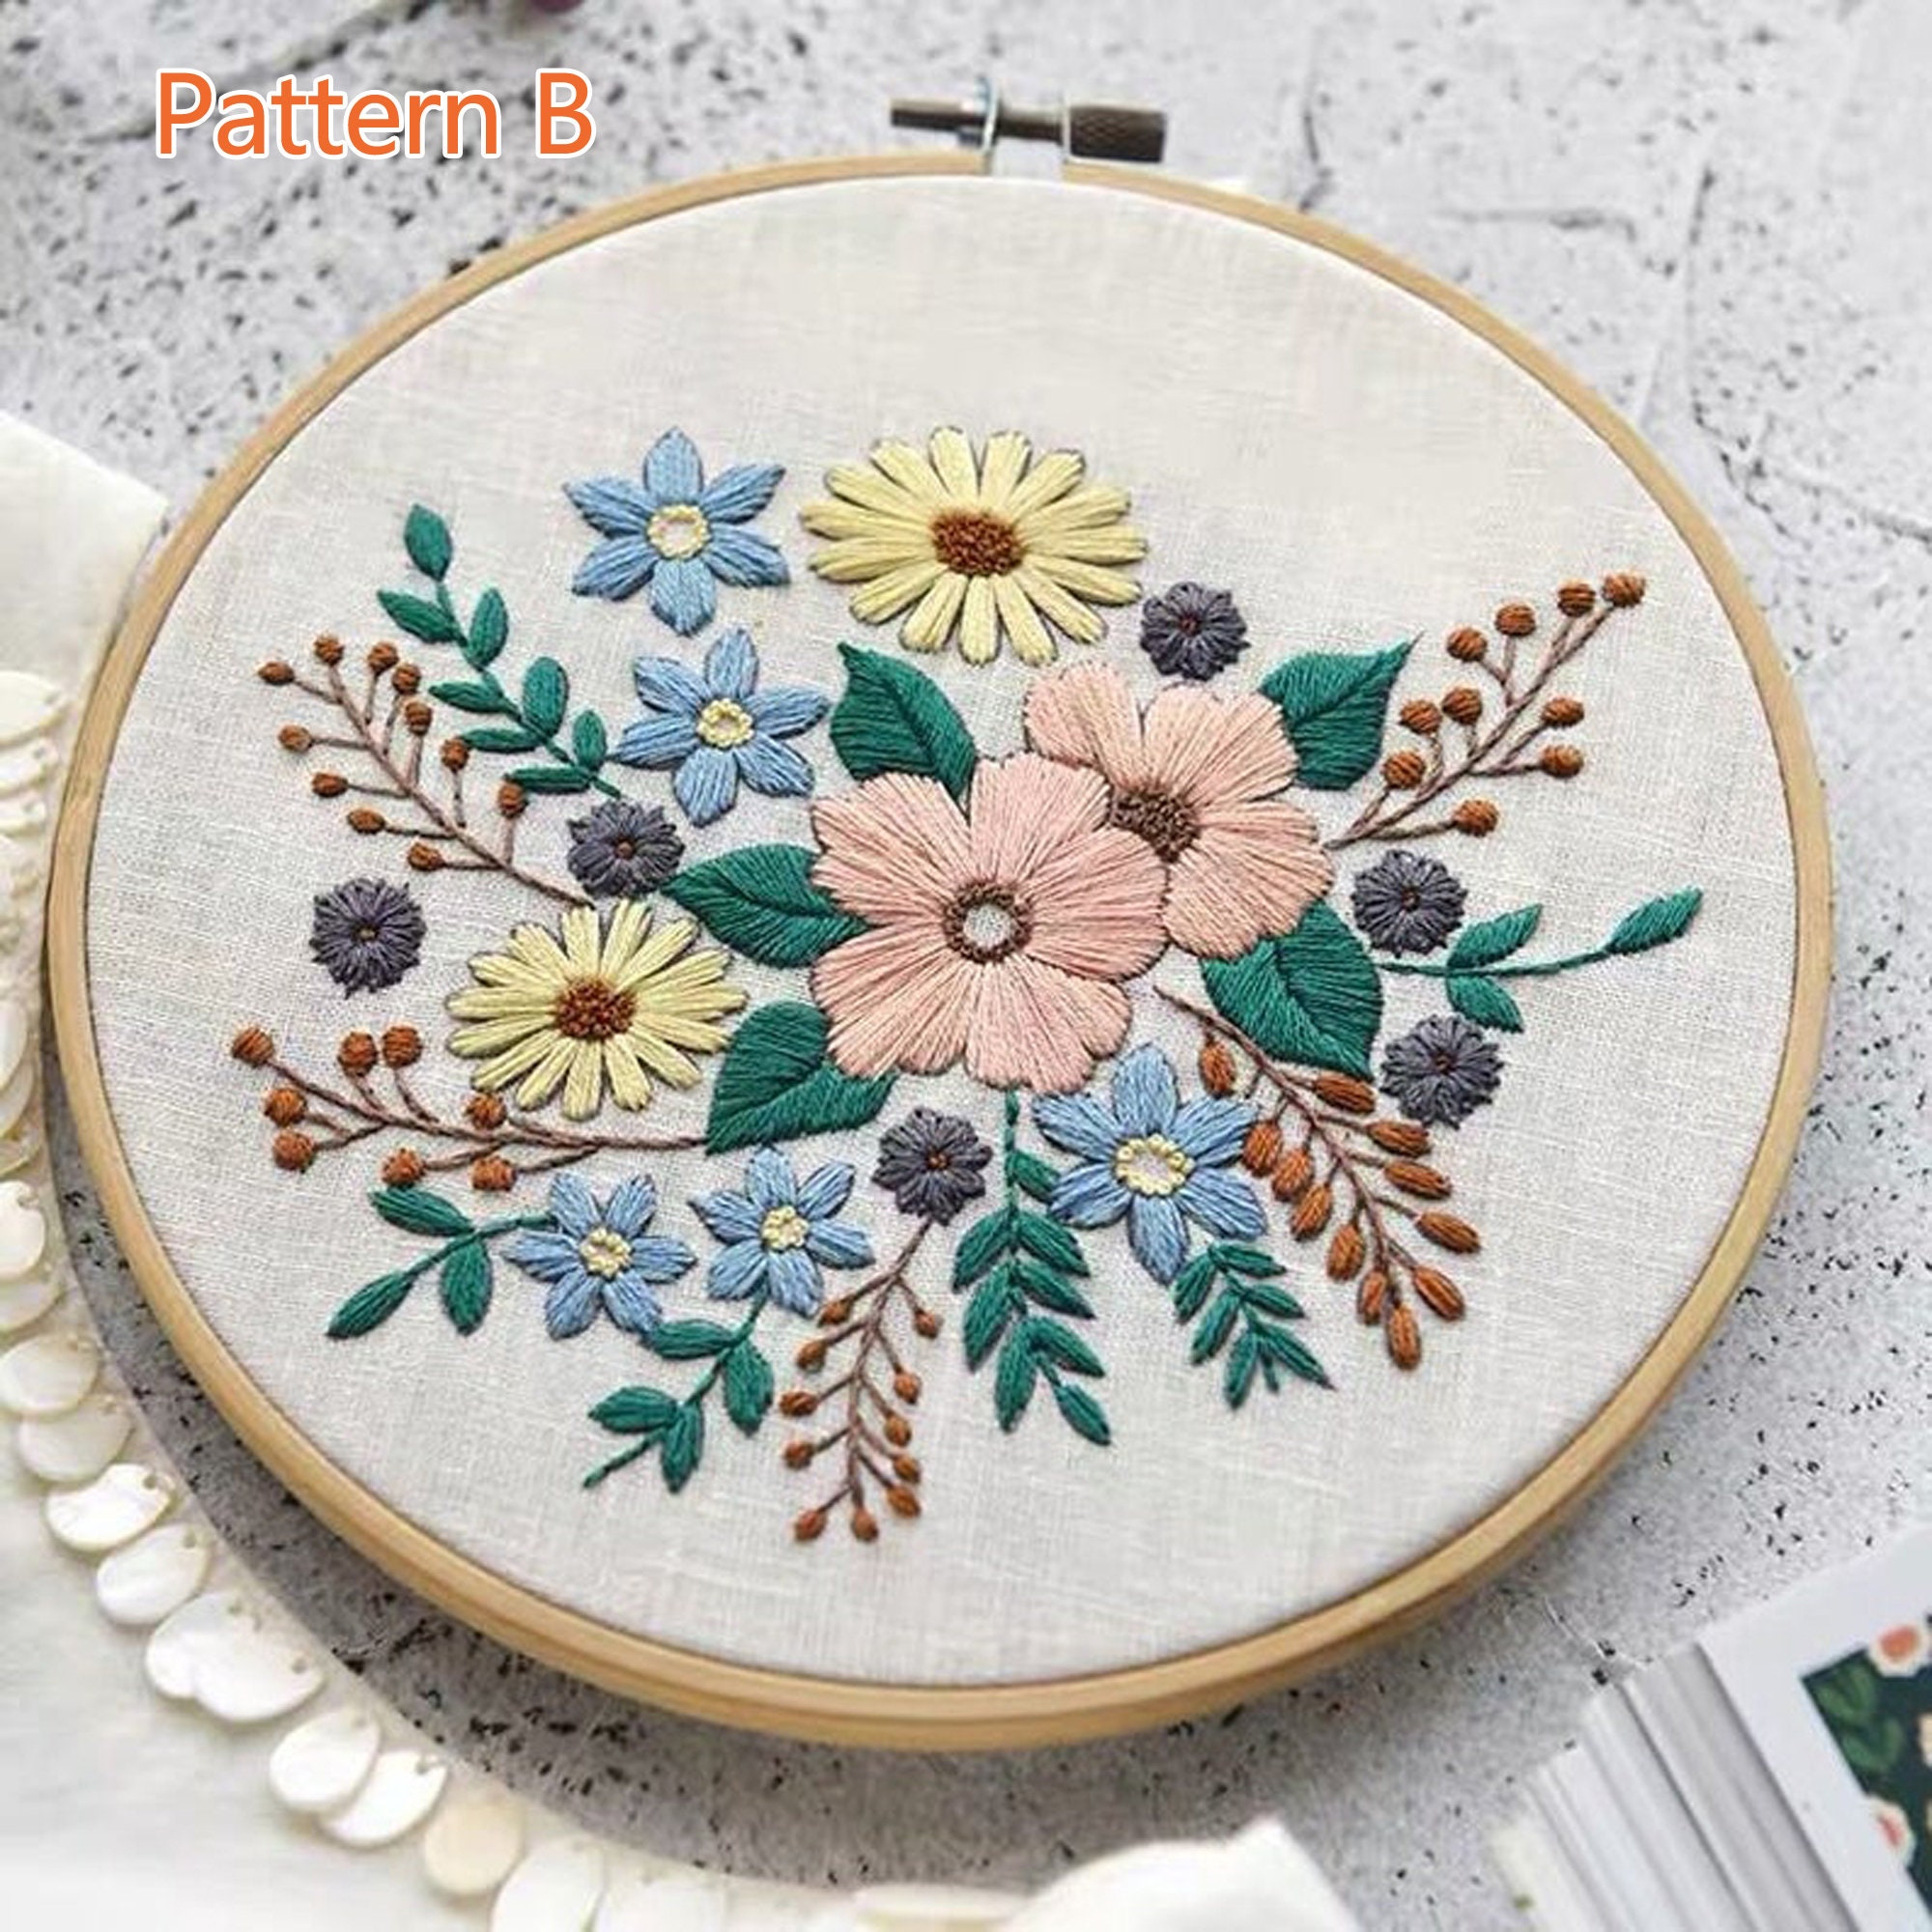 Blingpainting 3PC Handheld Flower Embroidery - Easy-to-Use, Portable,  Beautiful Designs, Embroidery Kit for Art Craft Handy Sewing, Perfect for  DIY